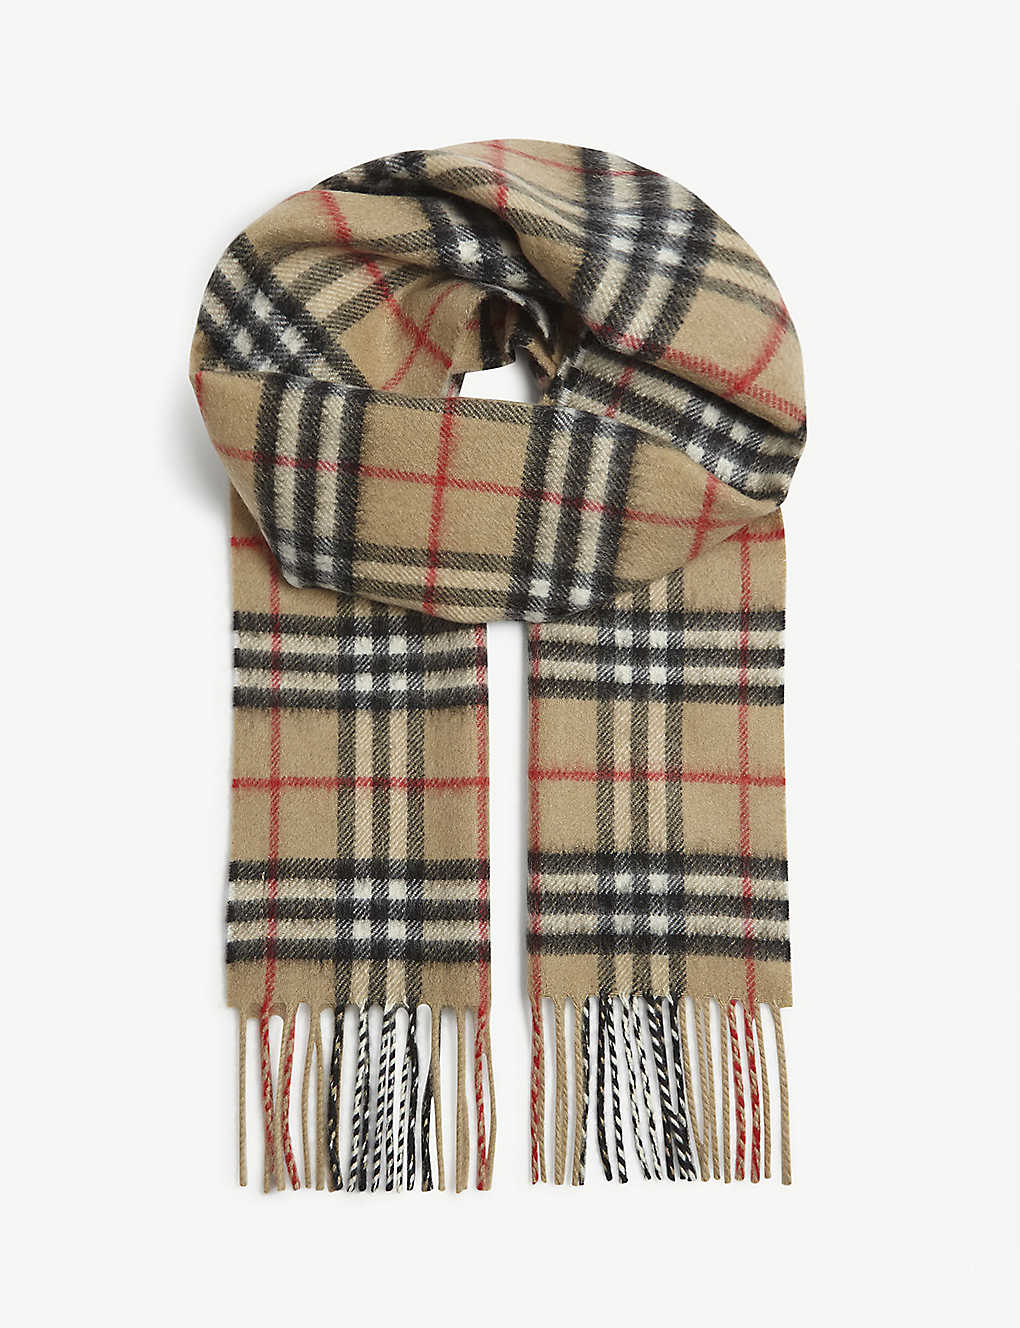 Selfridges & Co Boys Accessories Scarves Kids checked cashmere scarf 